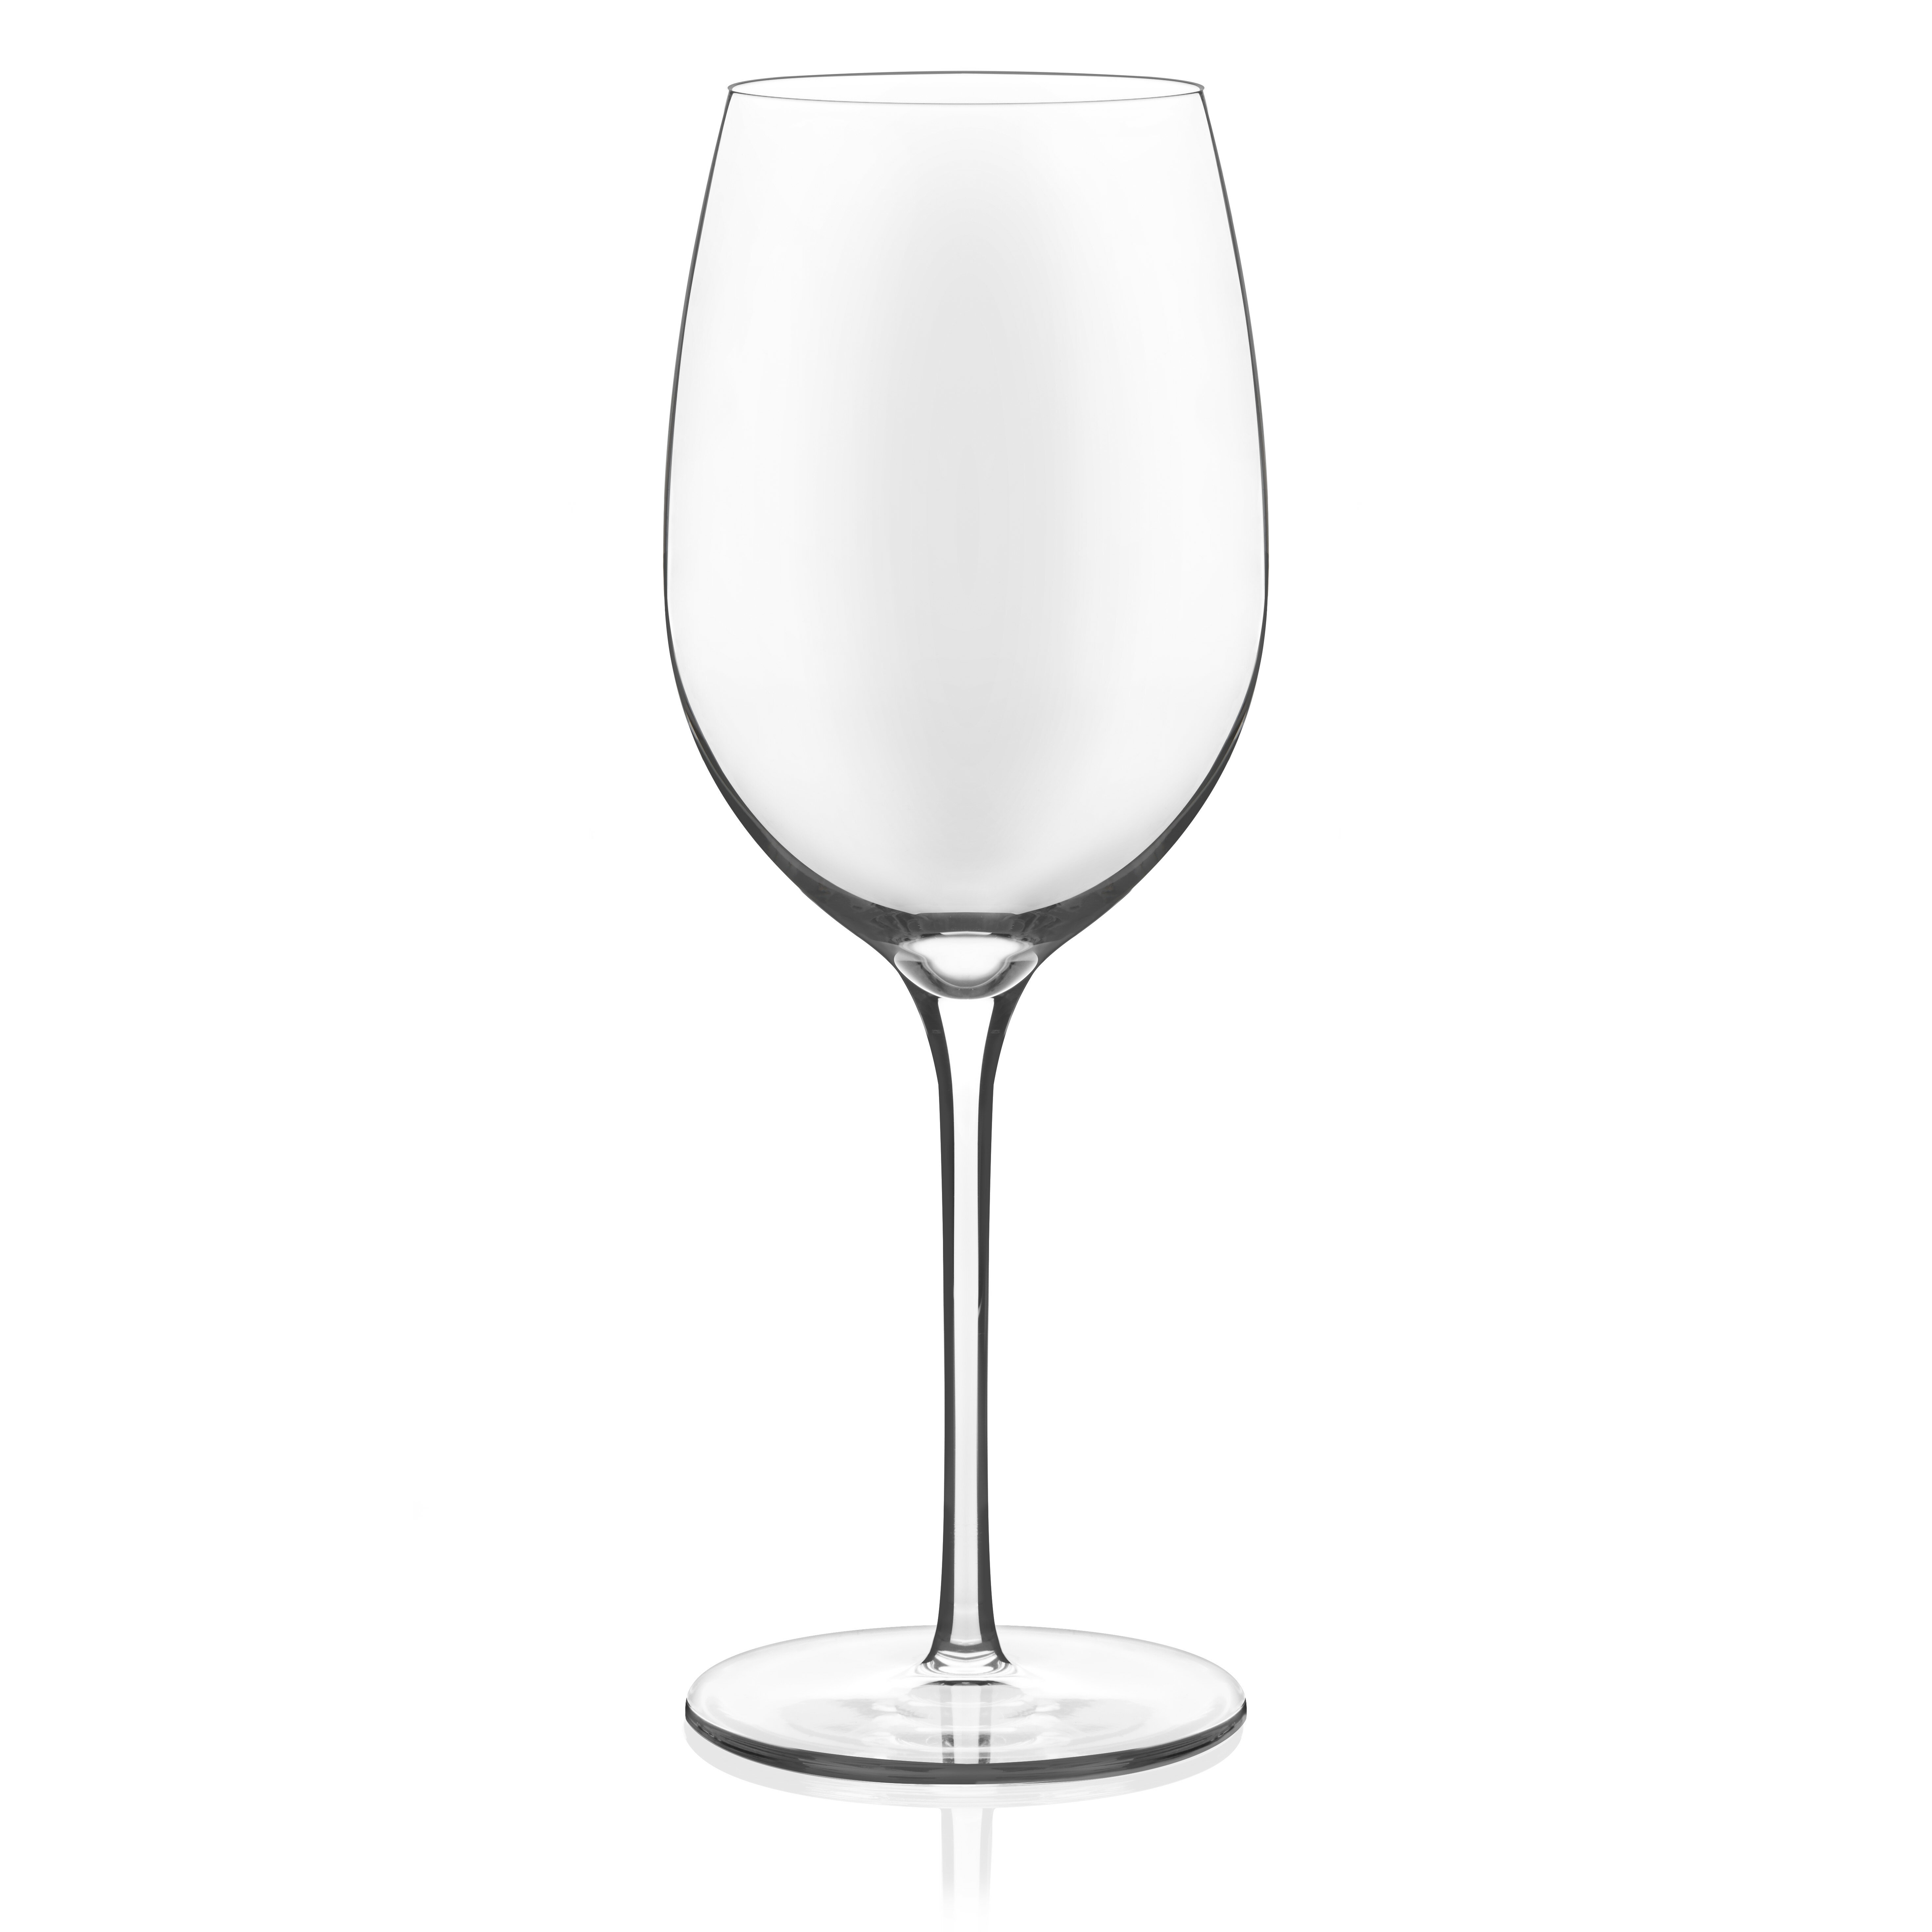 Libbey Signature Kentfield Estate All Purpose Wine Glasses And Reviews Wayfair